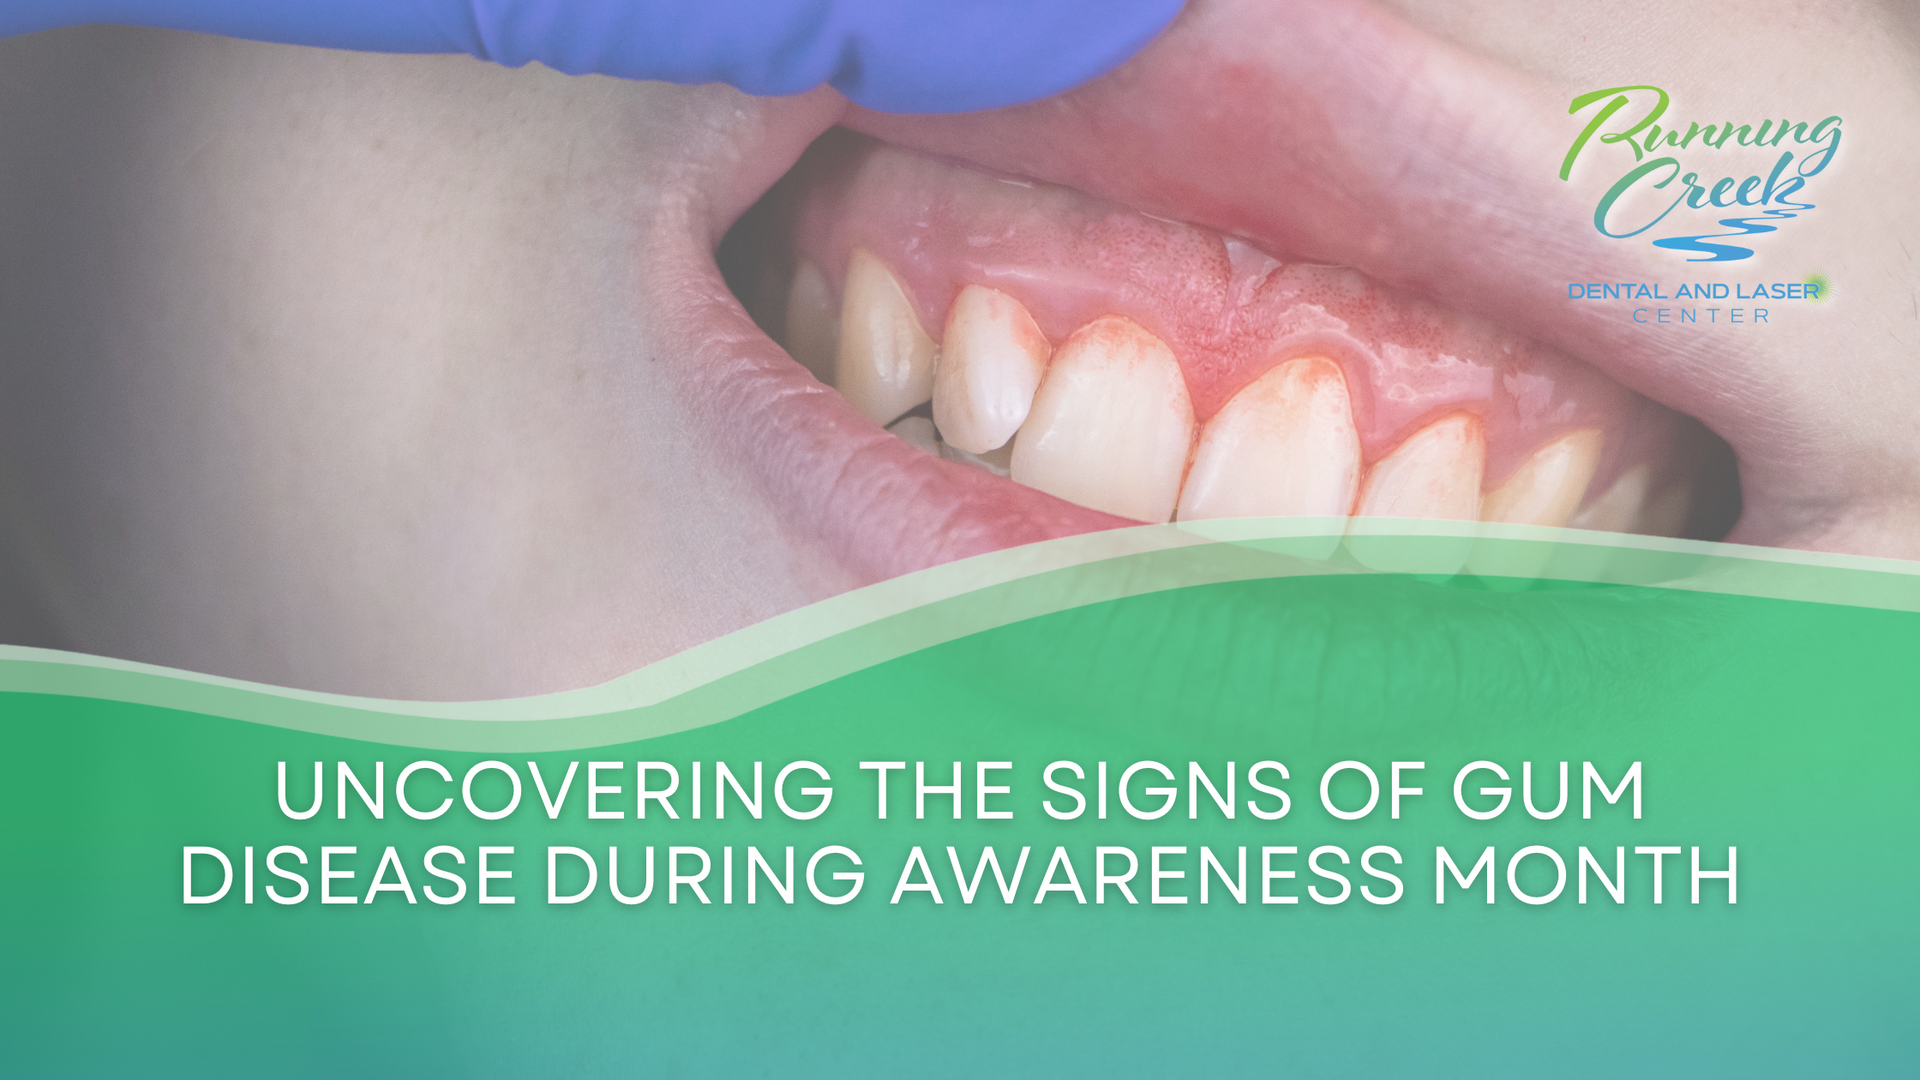 a person is uncovering the signs of gum disease during awareness month .